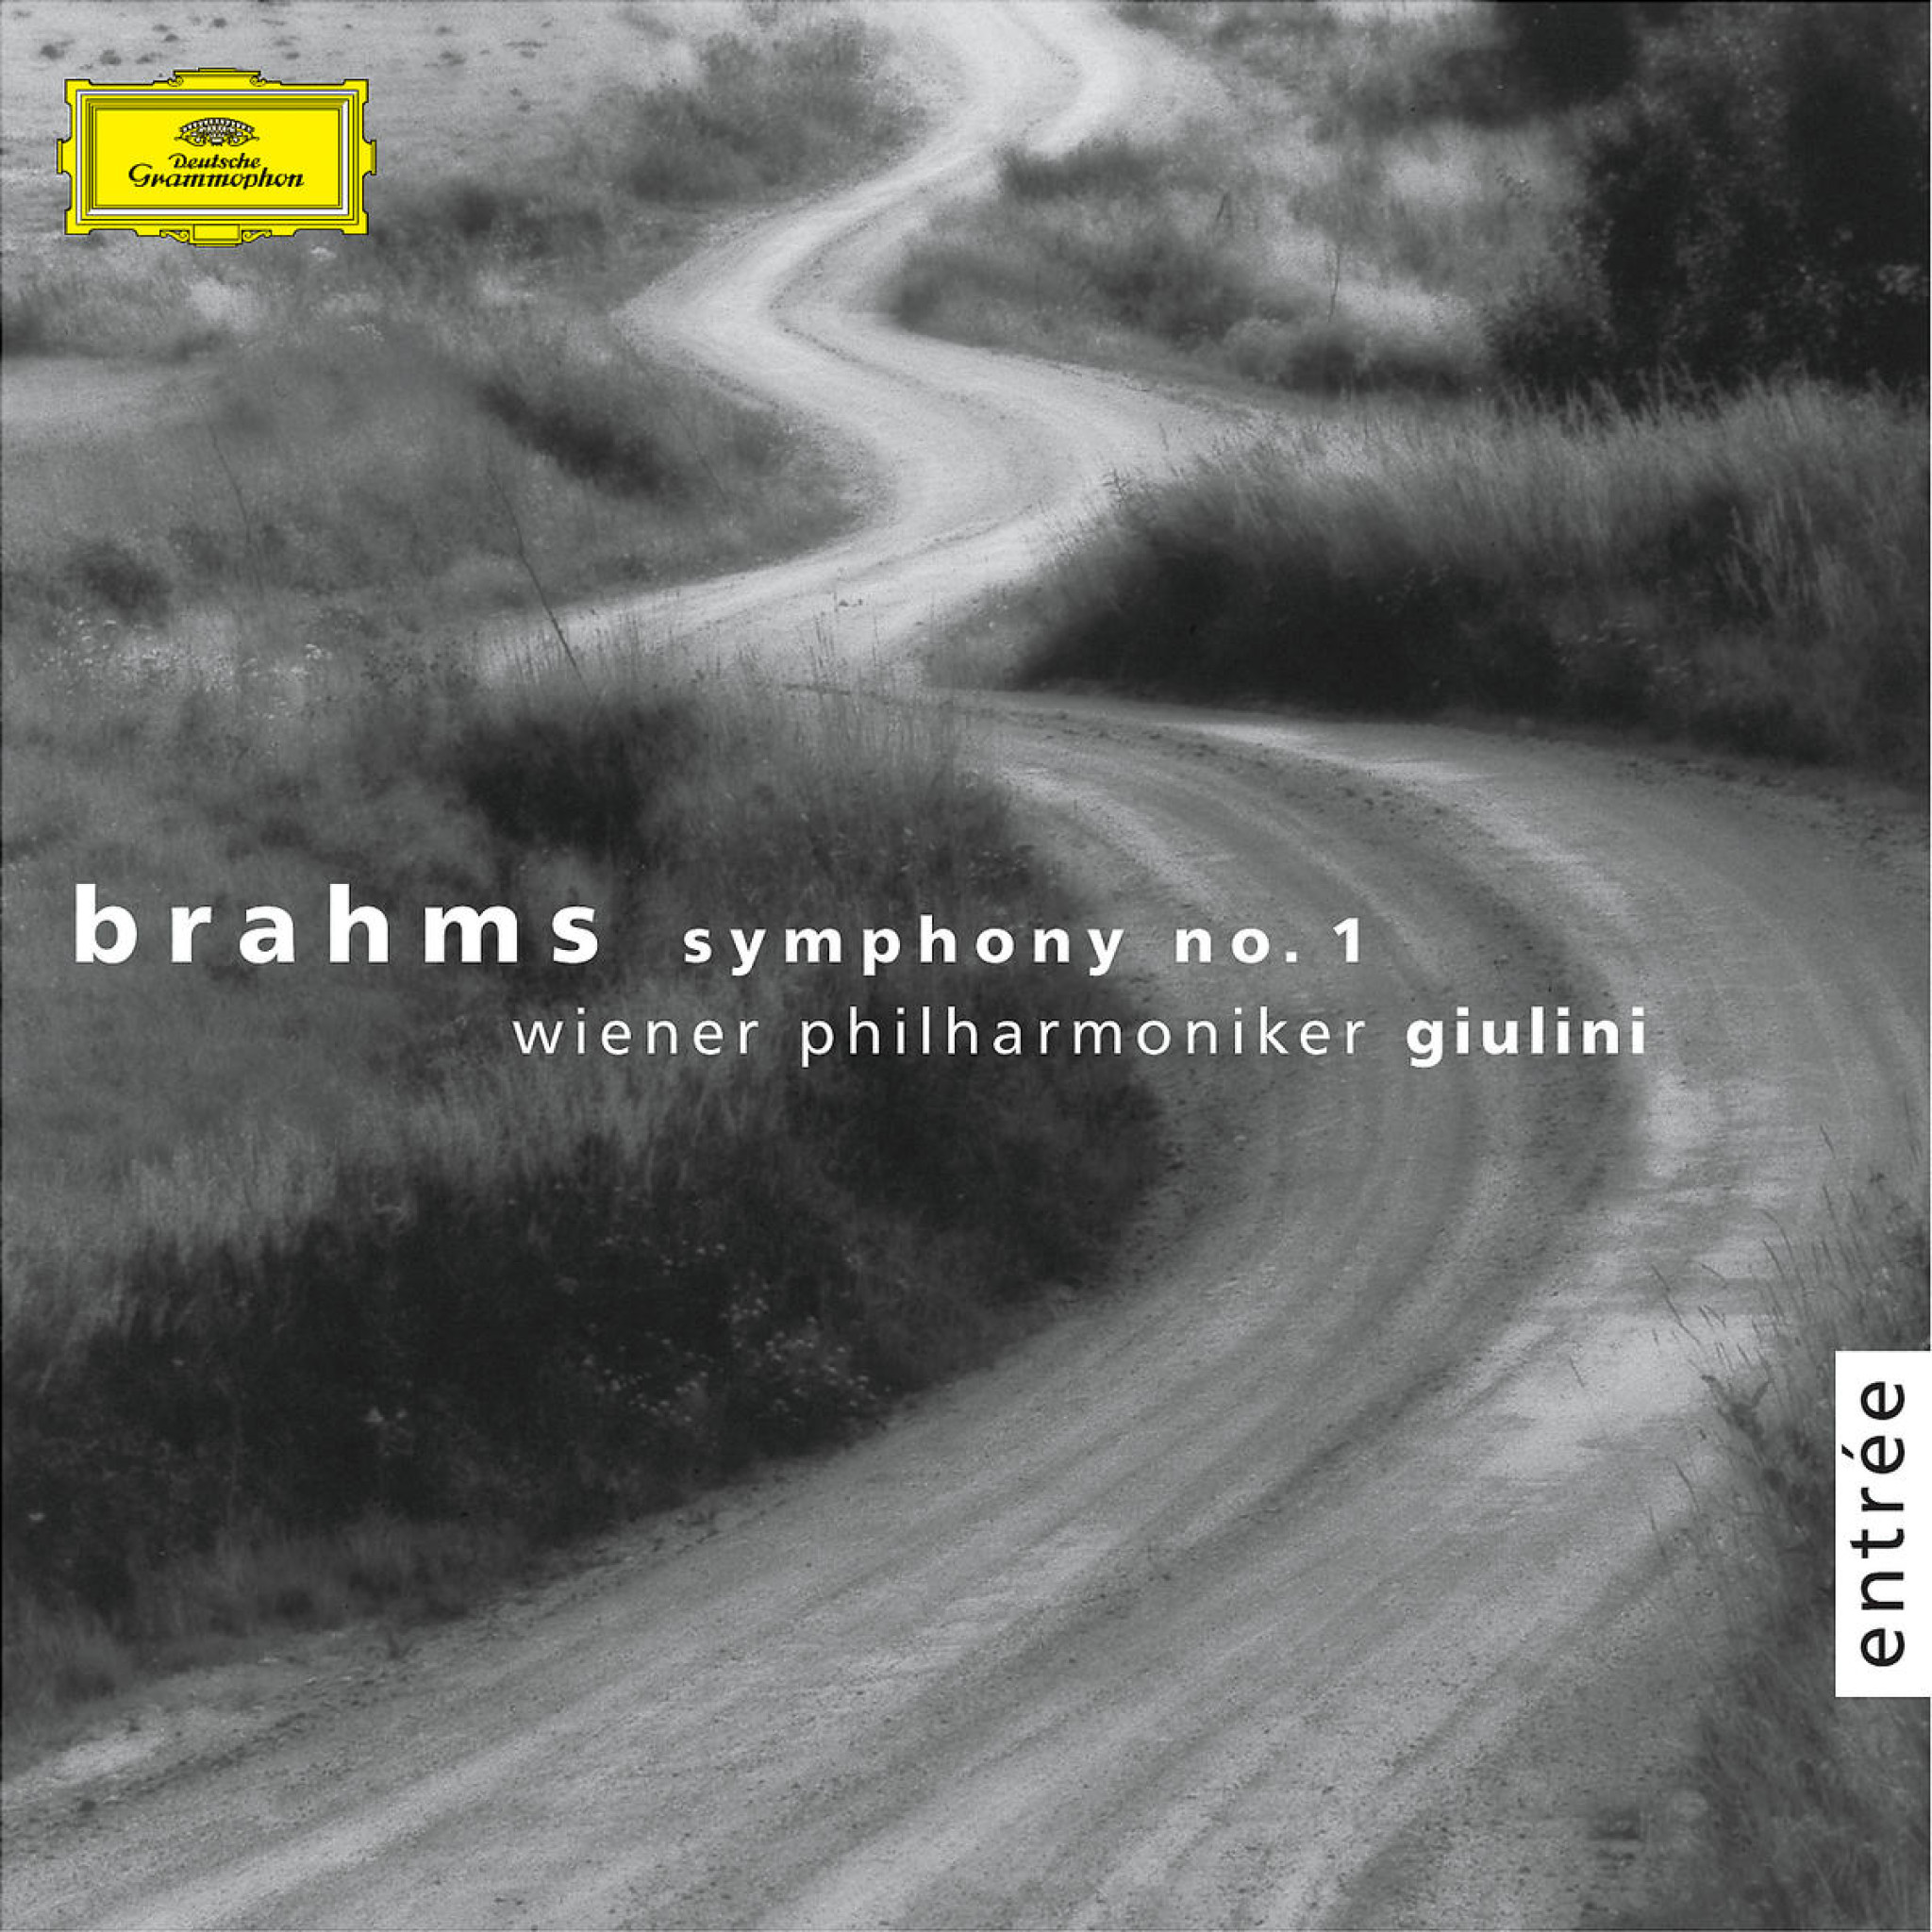 Brahms: Symphony No. 1 op. 68; Variations on a Theme by Haydn, op. 56a 0028947416629